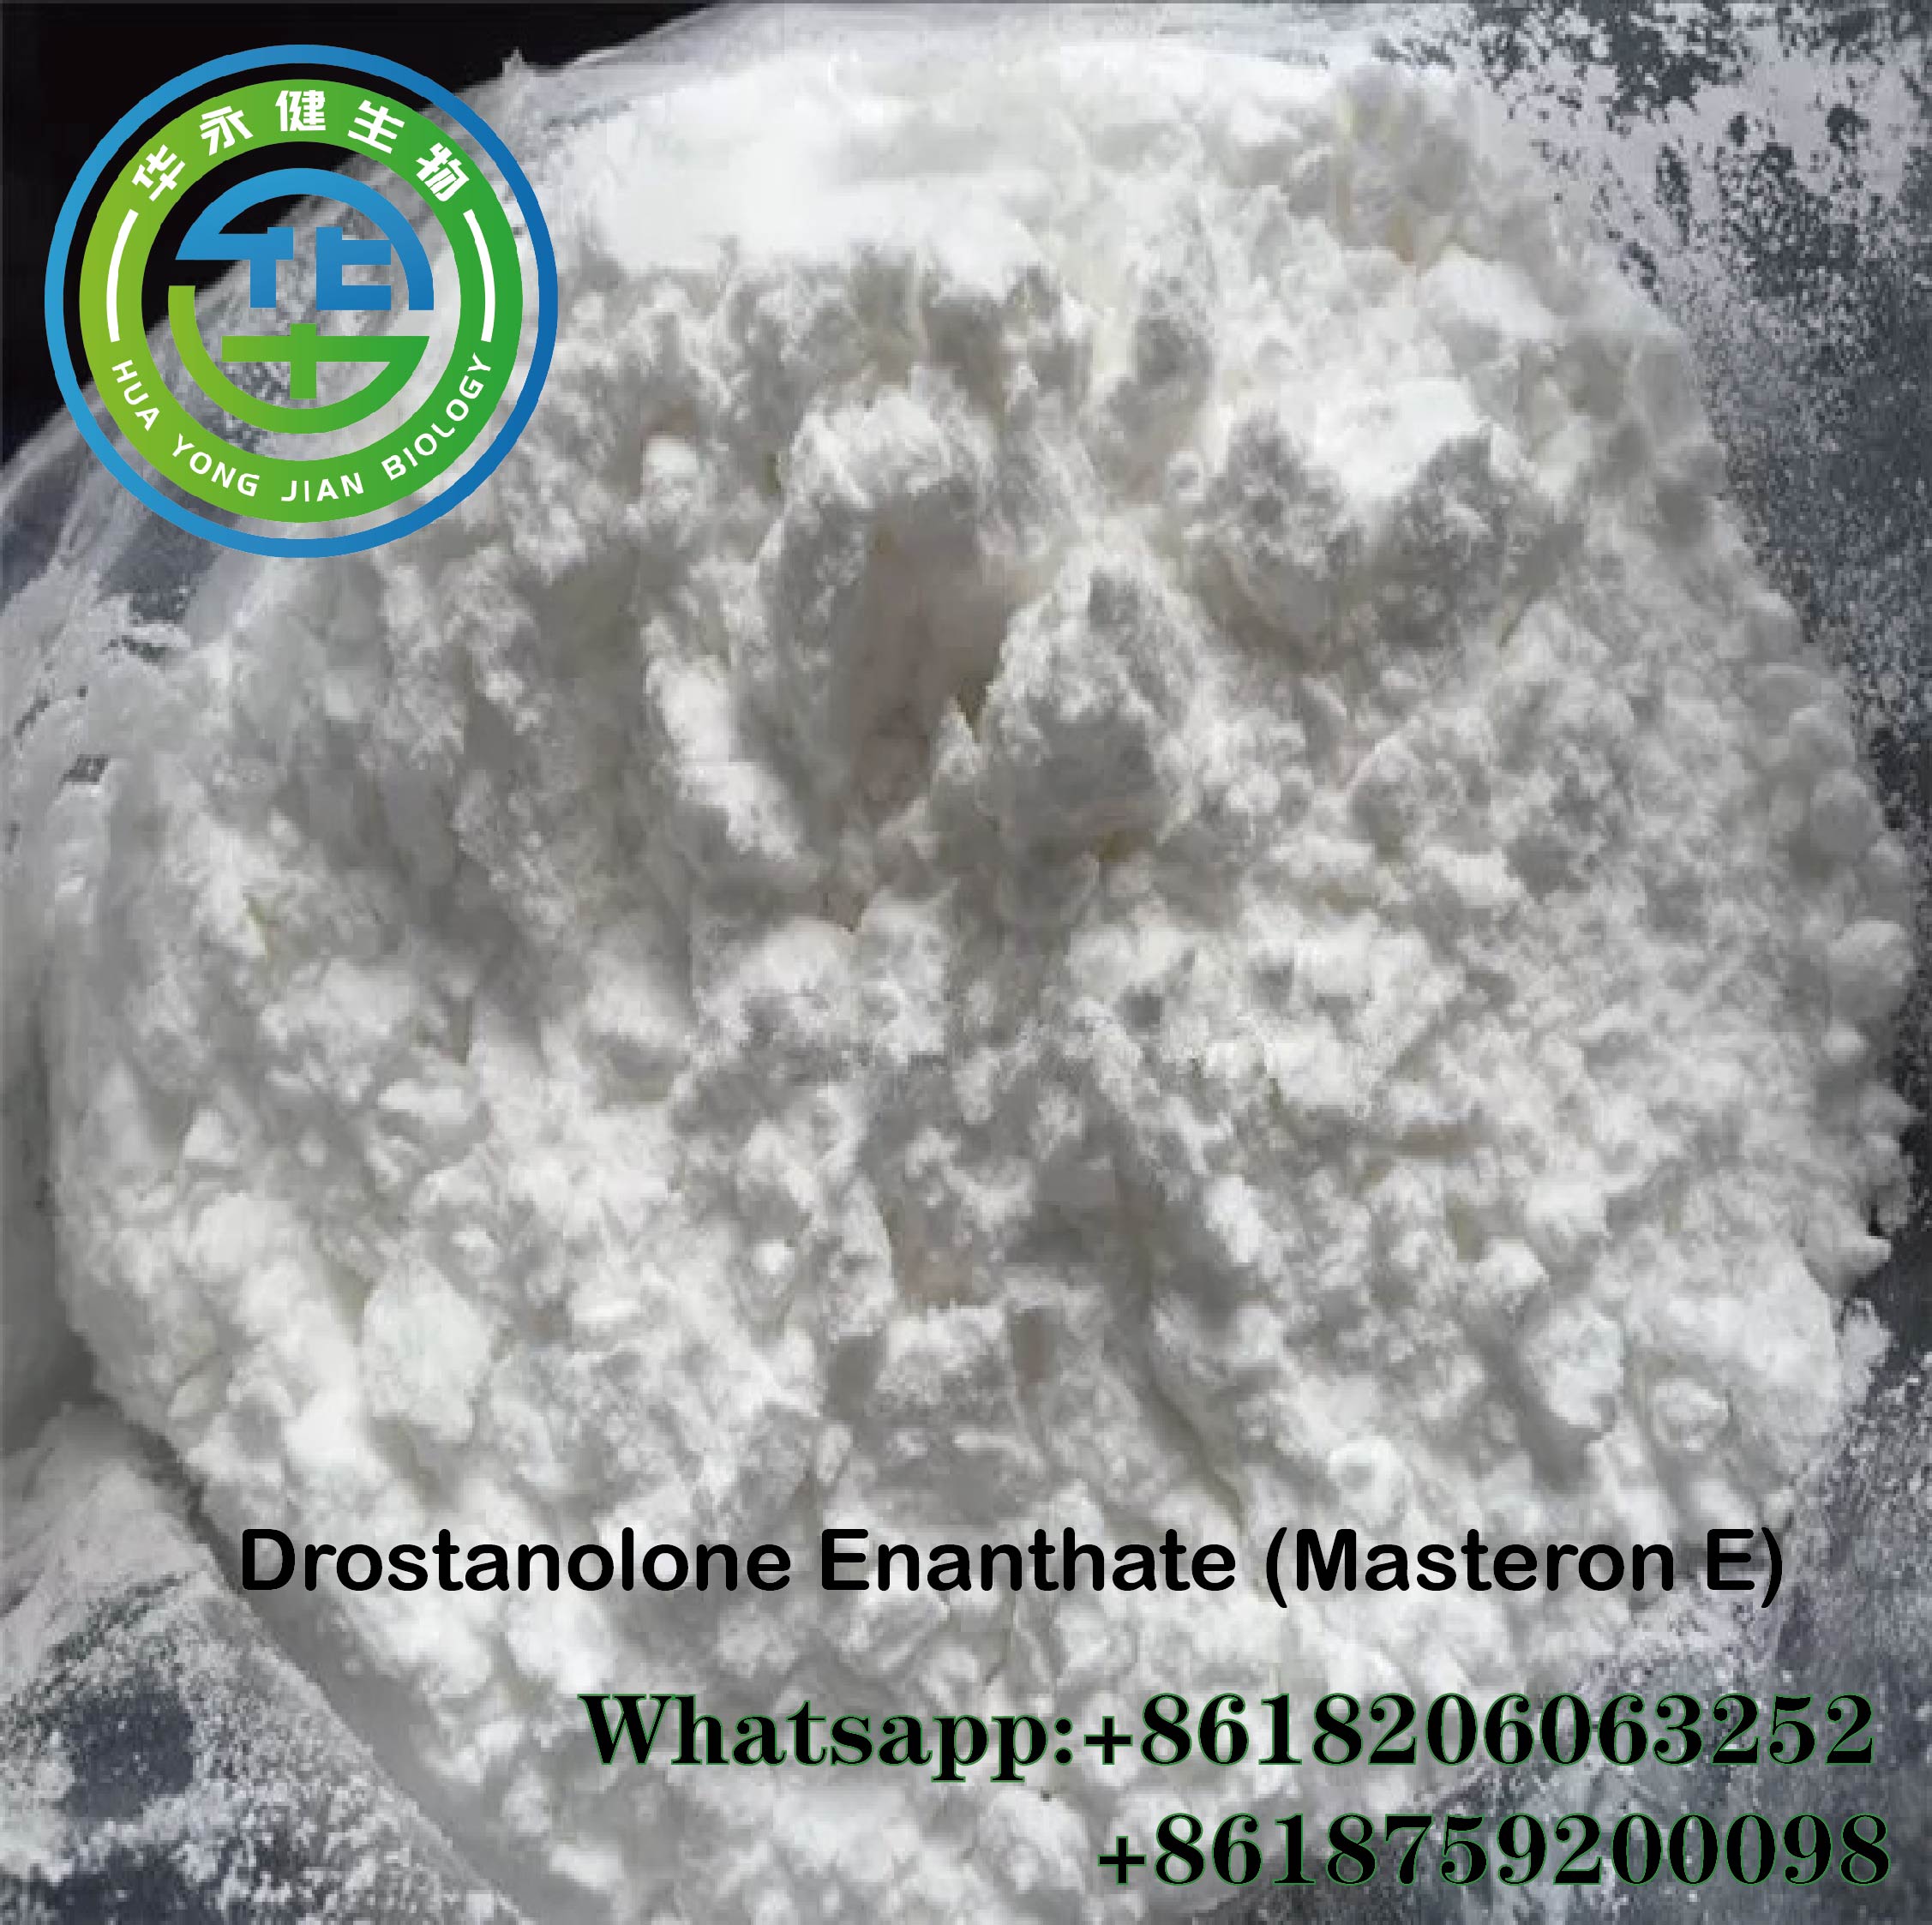 Powerful Anabolic Drostanolone Enanthate/Masteron E Androgenic Steroids Powder for Muscle Building  